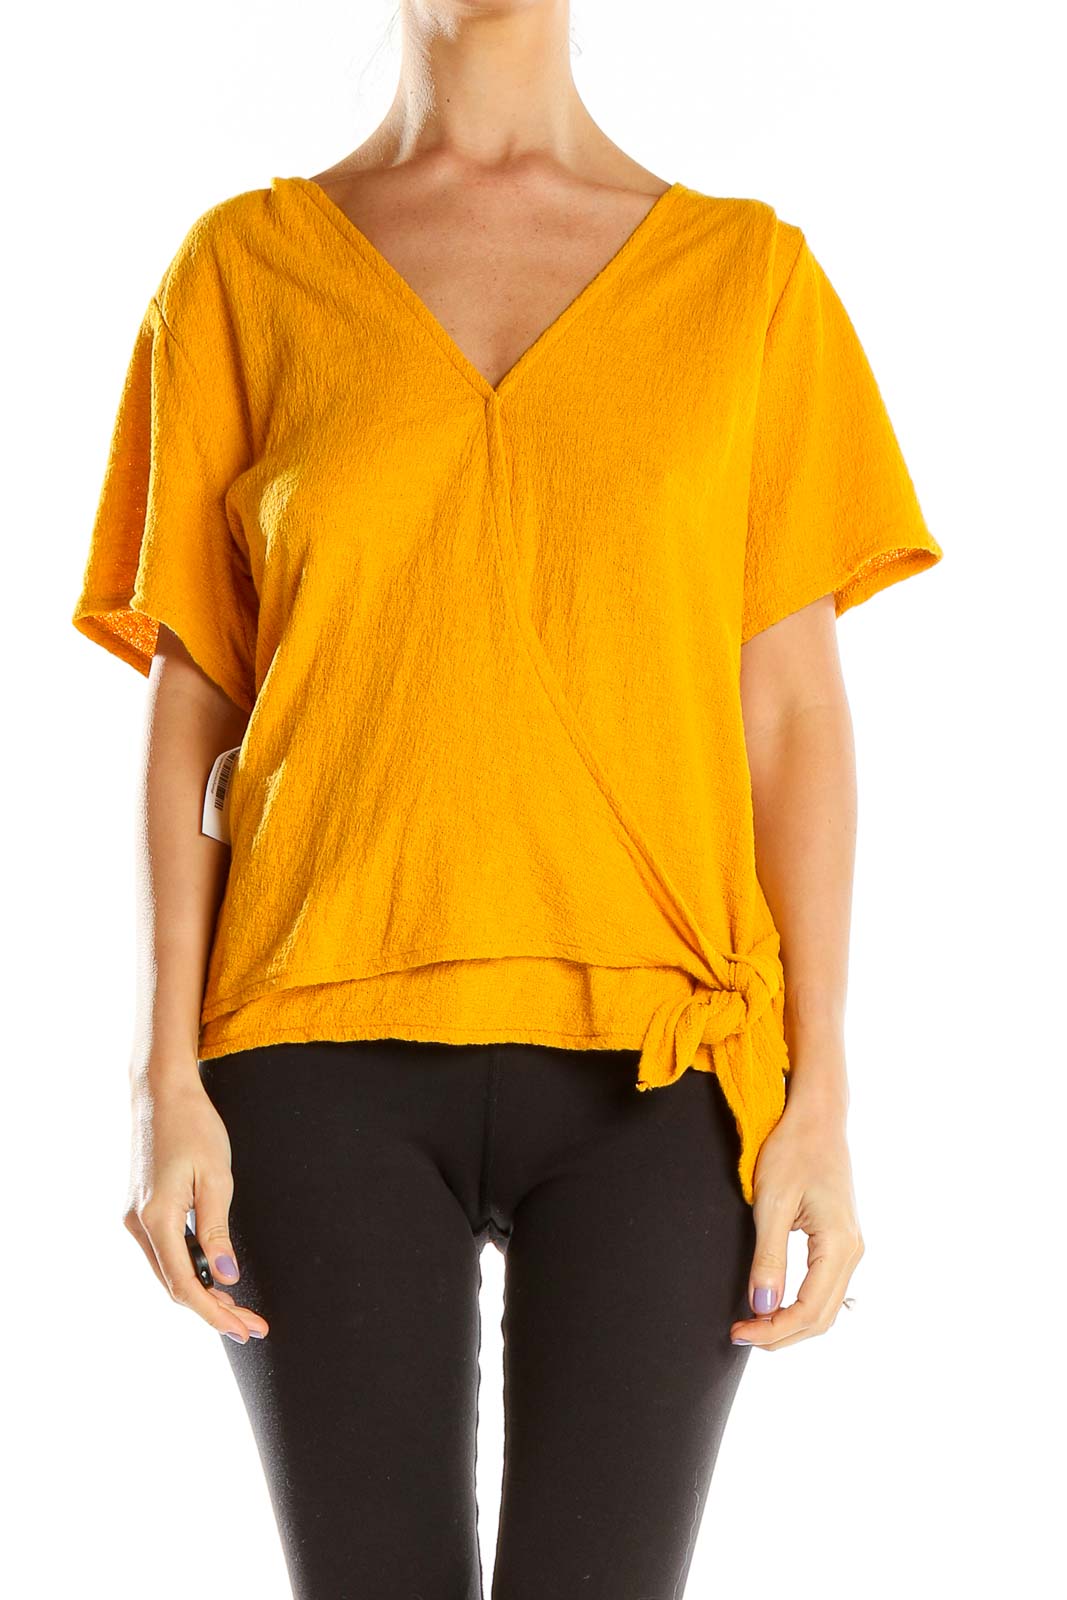 Yellow Textured Casual Top Front